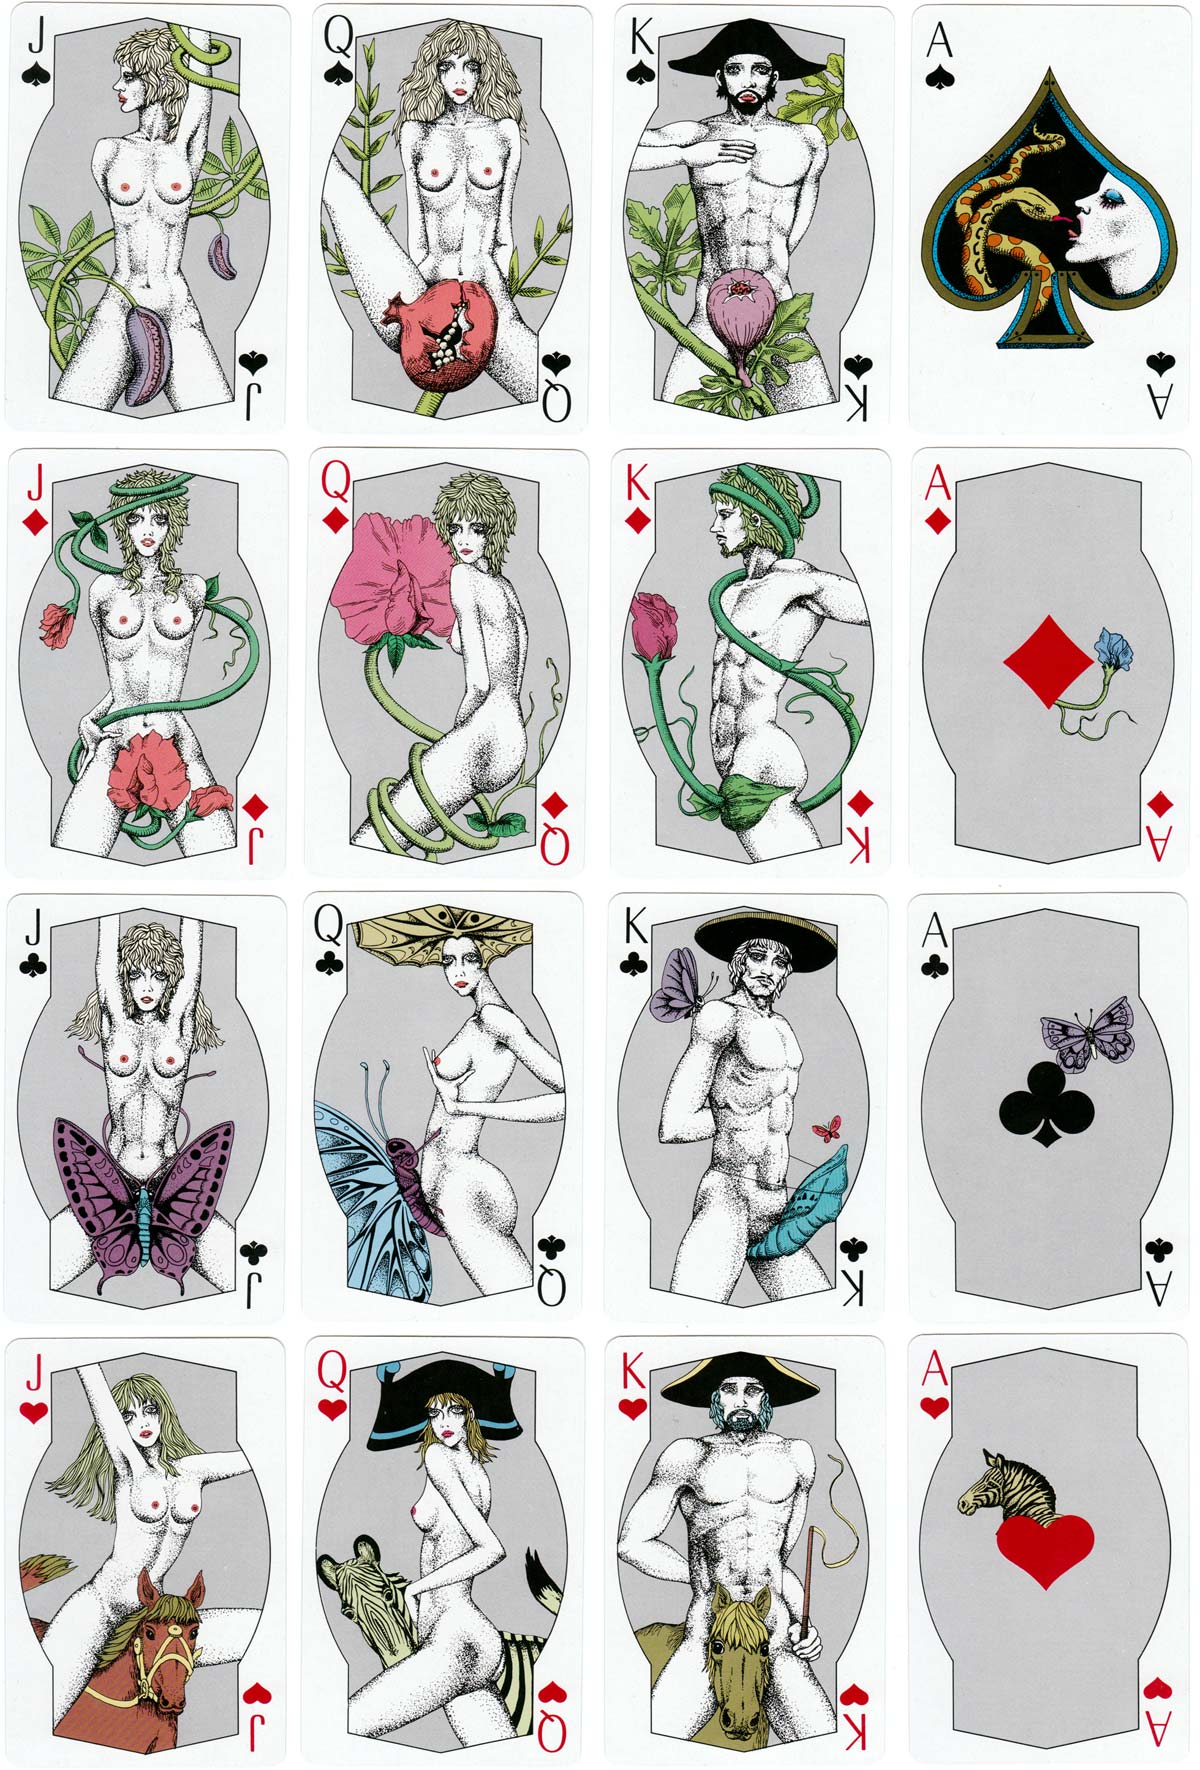 “Shapely” non-standard adult playing cards manufactured by Angel Playing Cards Co., Japan, 1980